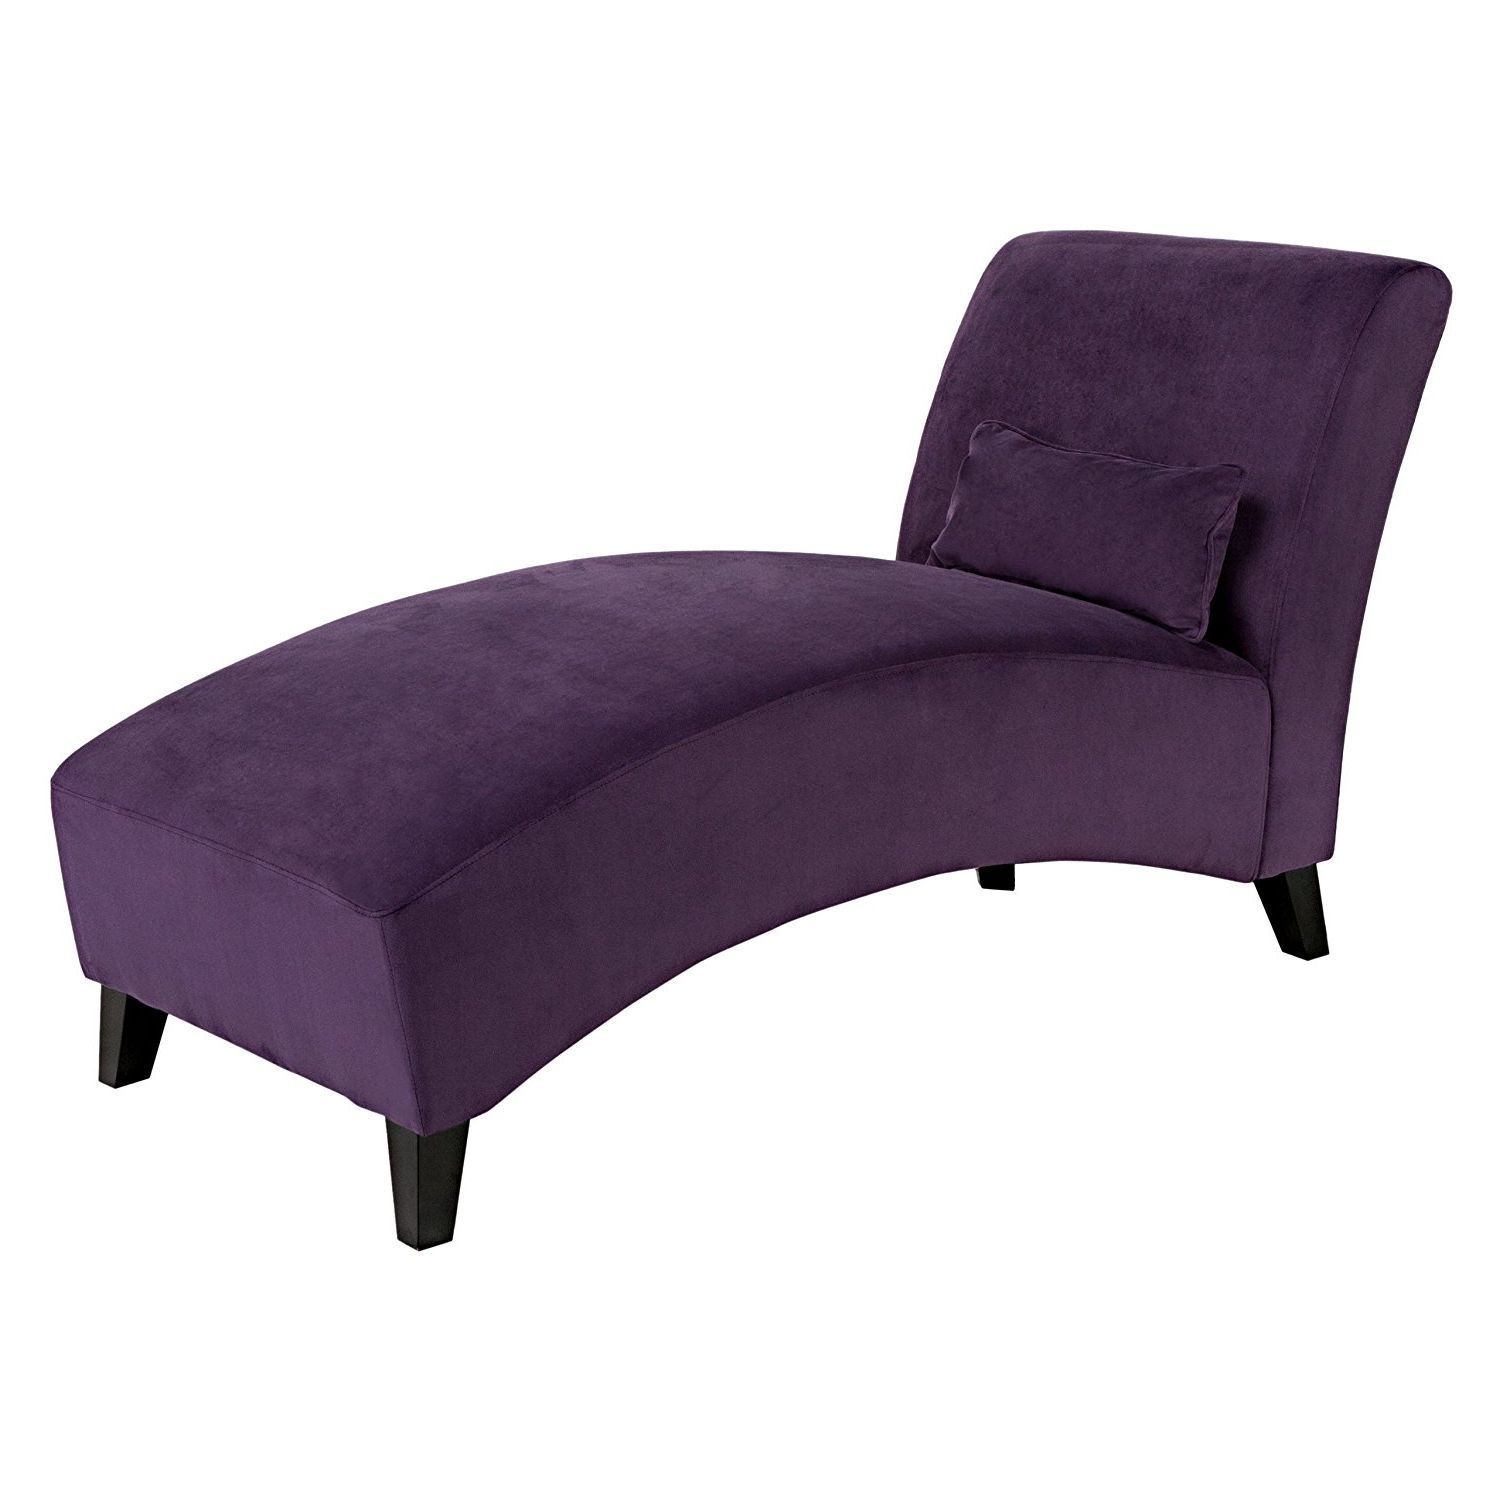 Purple Chaise Lounges For Latest Amazon: Handy Living Chaise Lounge Chair, Purple: Kitchen & Dining (View 1 of 15)